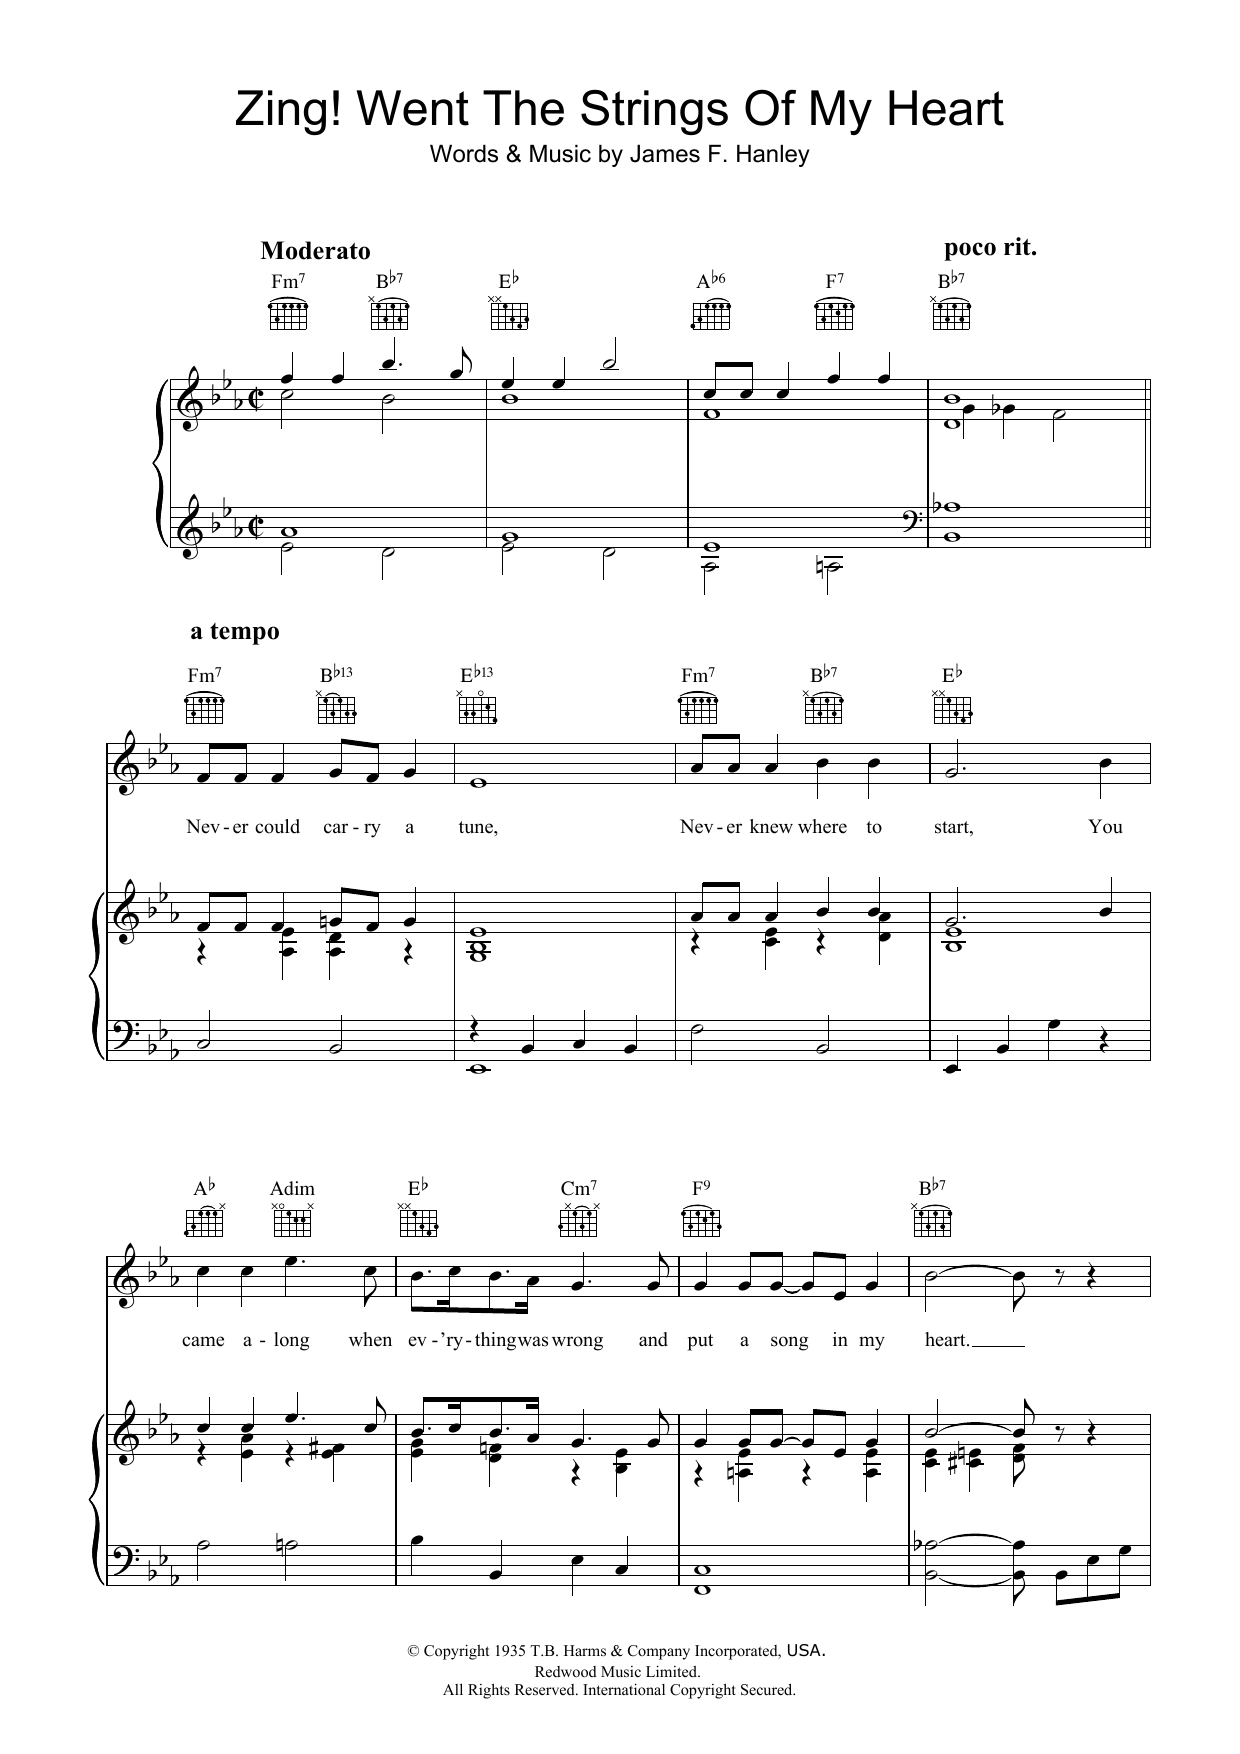 Download James F. Hanley Zing! Went The Strings Of My Heart Sheet Music